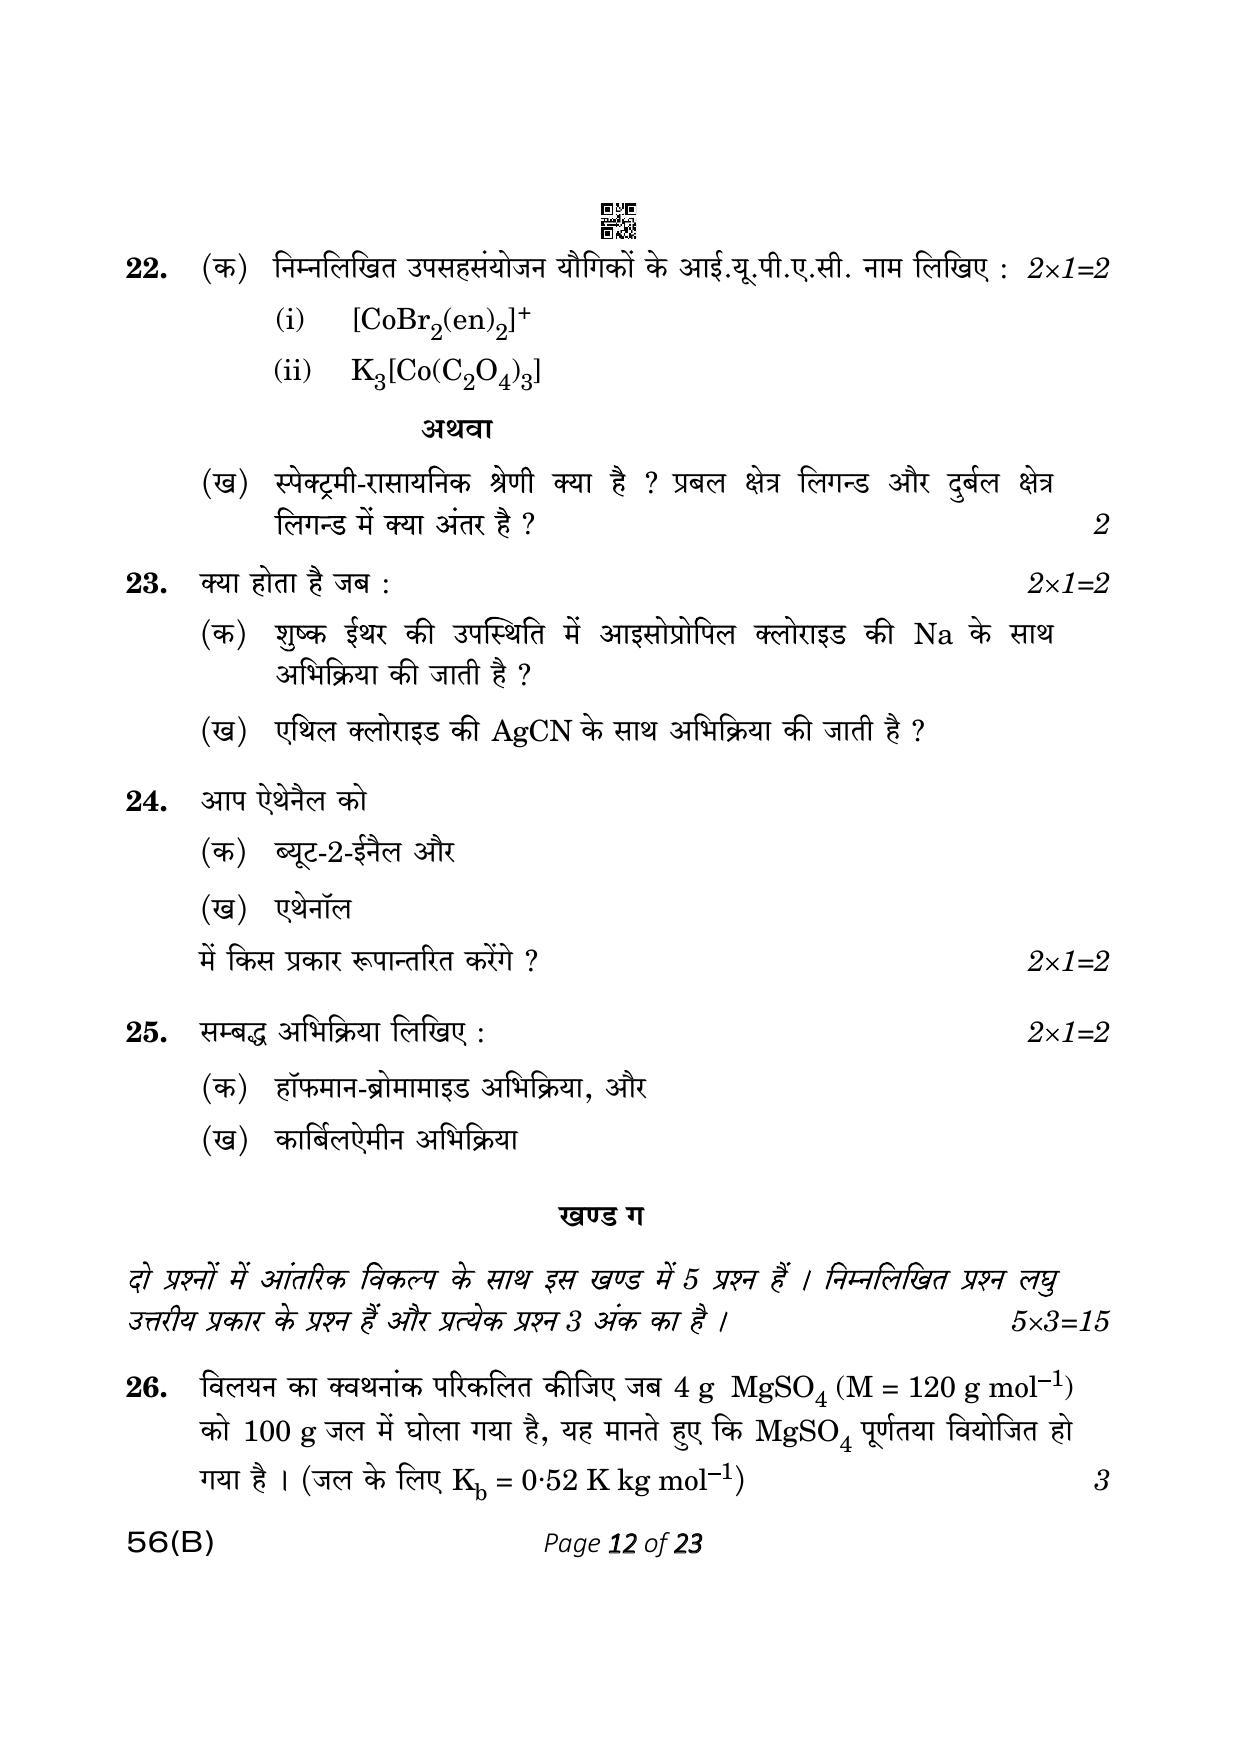 CBSE Class 12 56-B Chemistry 2023 (Compartment) Question Paper - Page 12